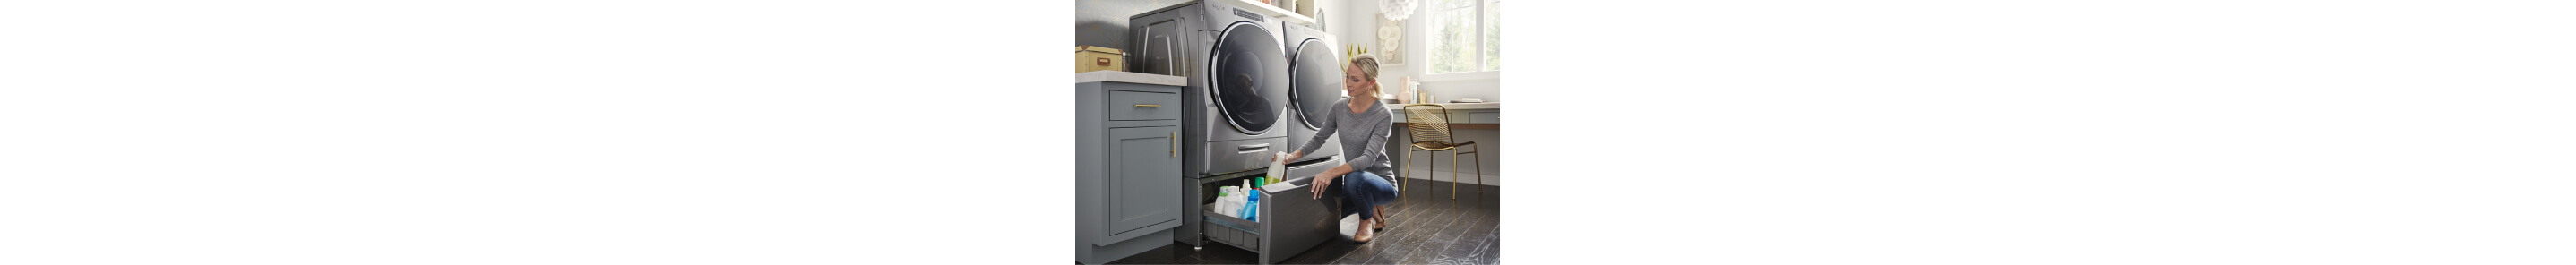 What Is the Sanitize Cycle on a Dishwasher?